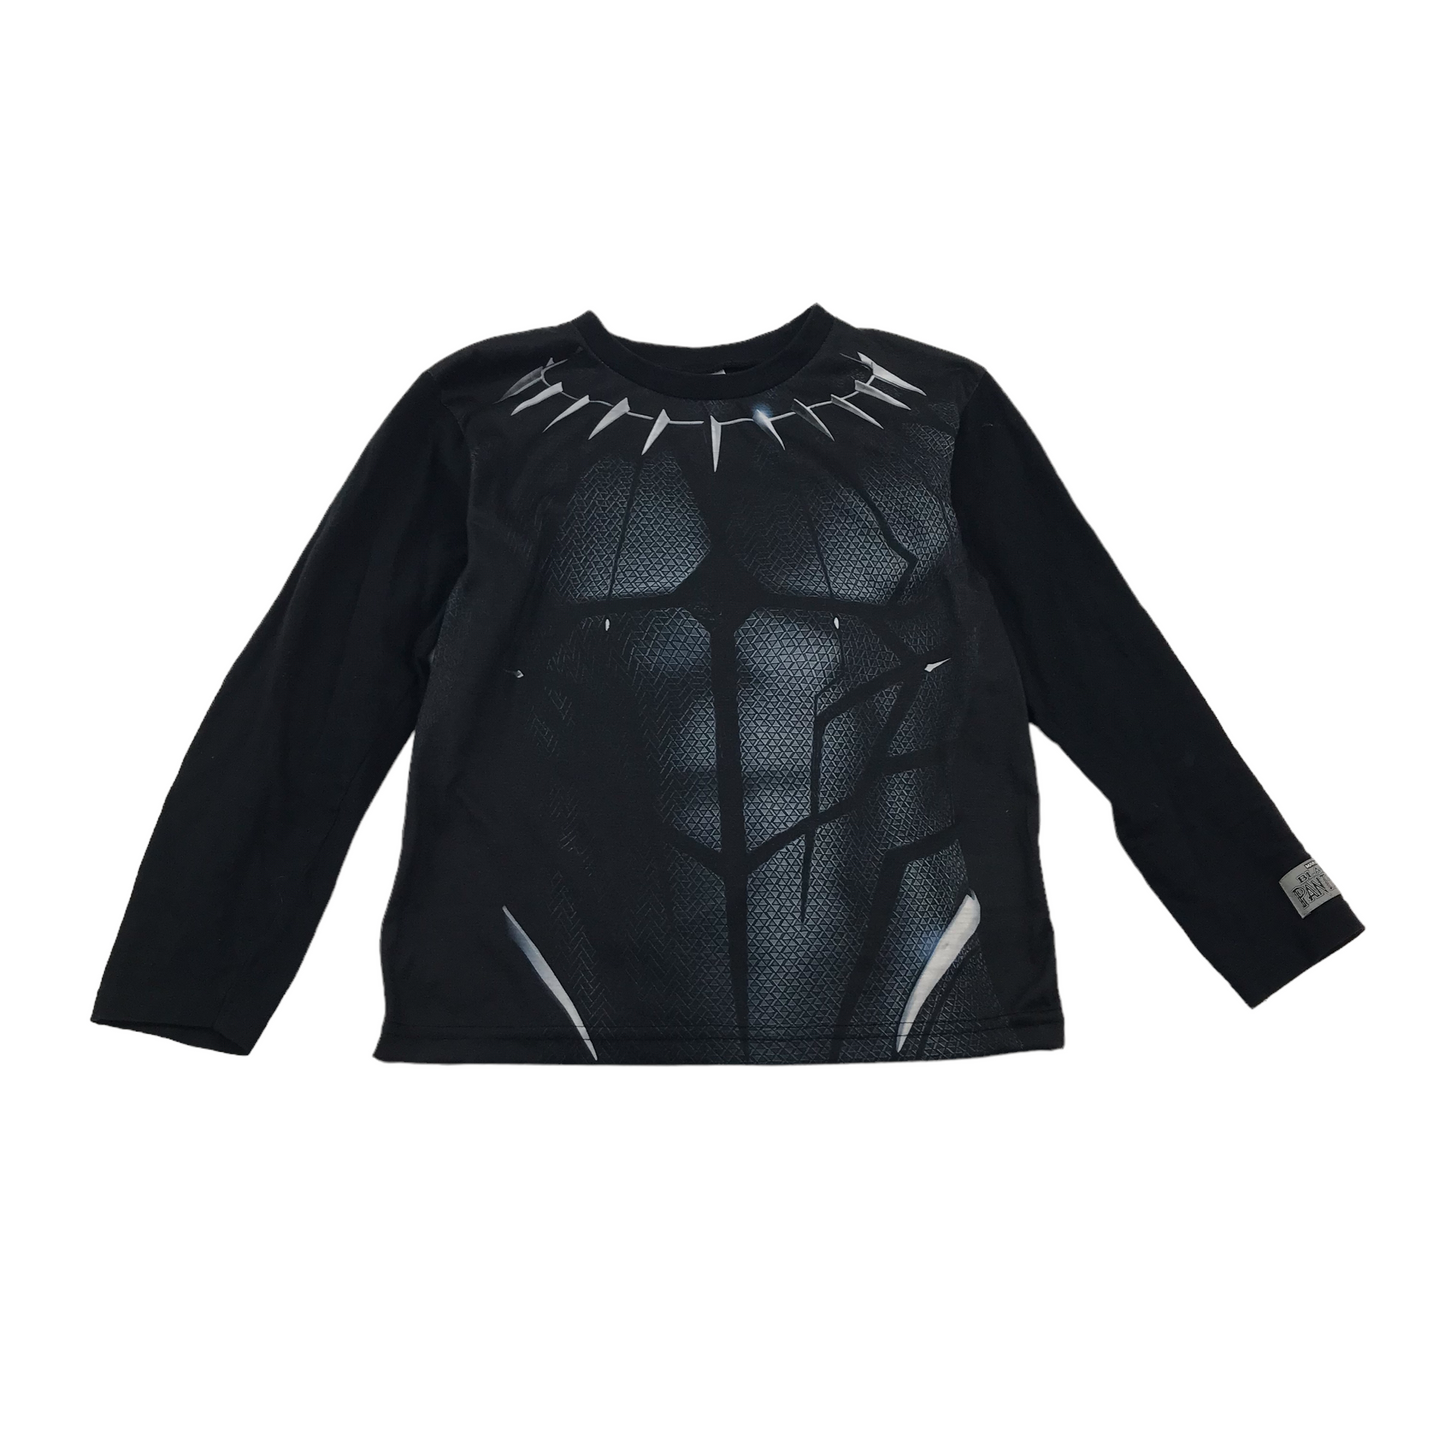 Black Panther Long Sleeve T-shirt Age 7